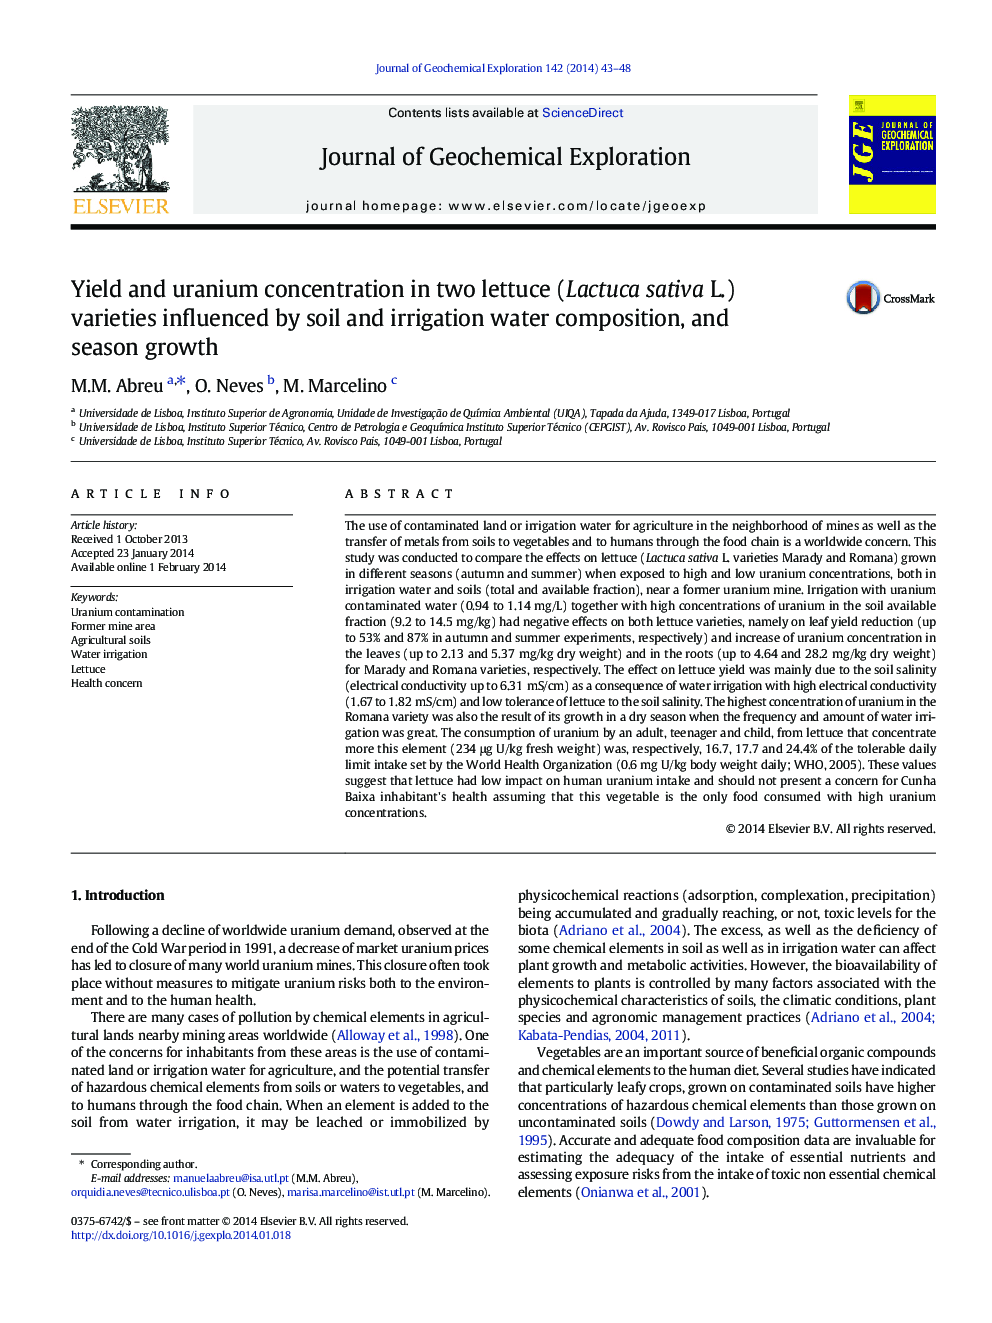 Yield and uranium concentration in two lettuce (Lactuca sativa L.) varieties influenced by soil and irrigation water composition, and season growth